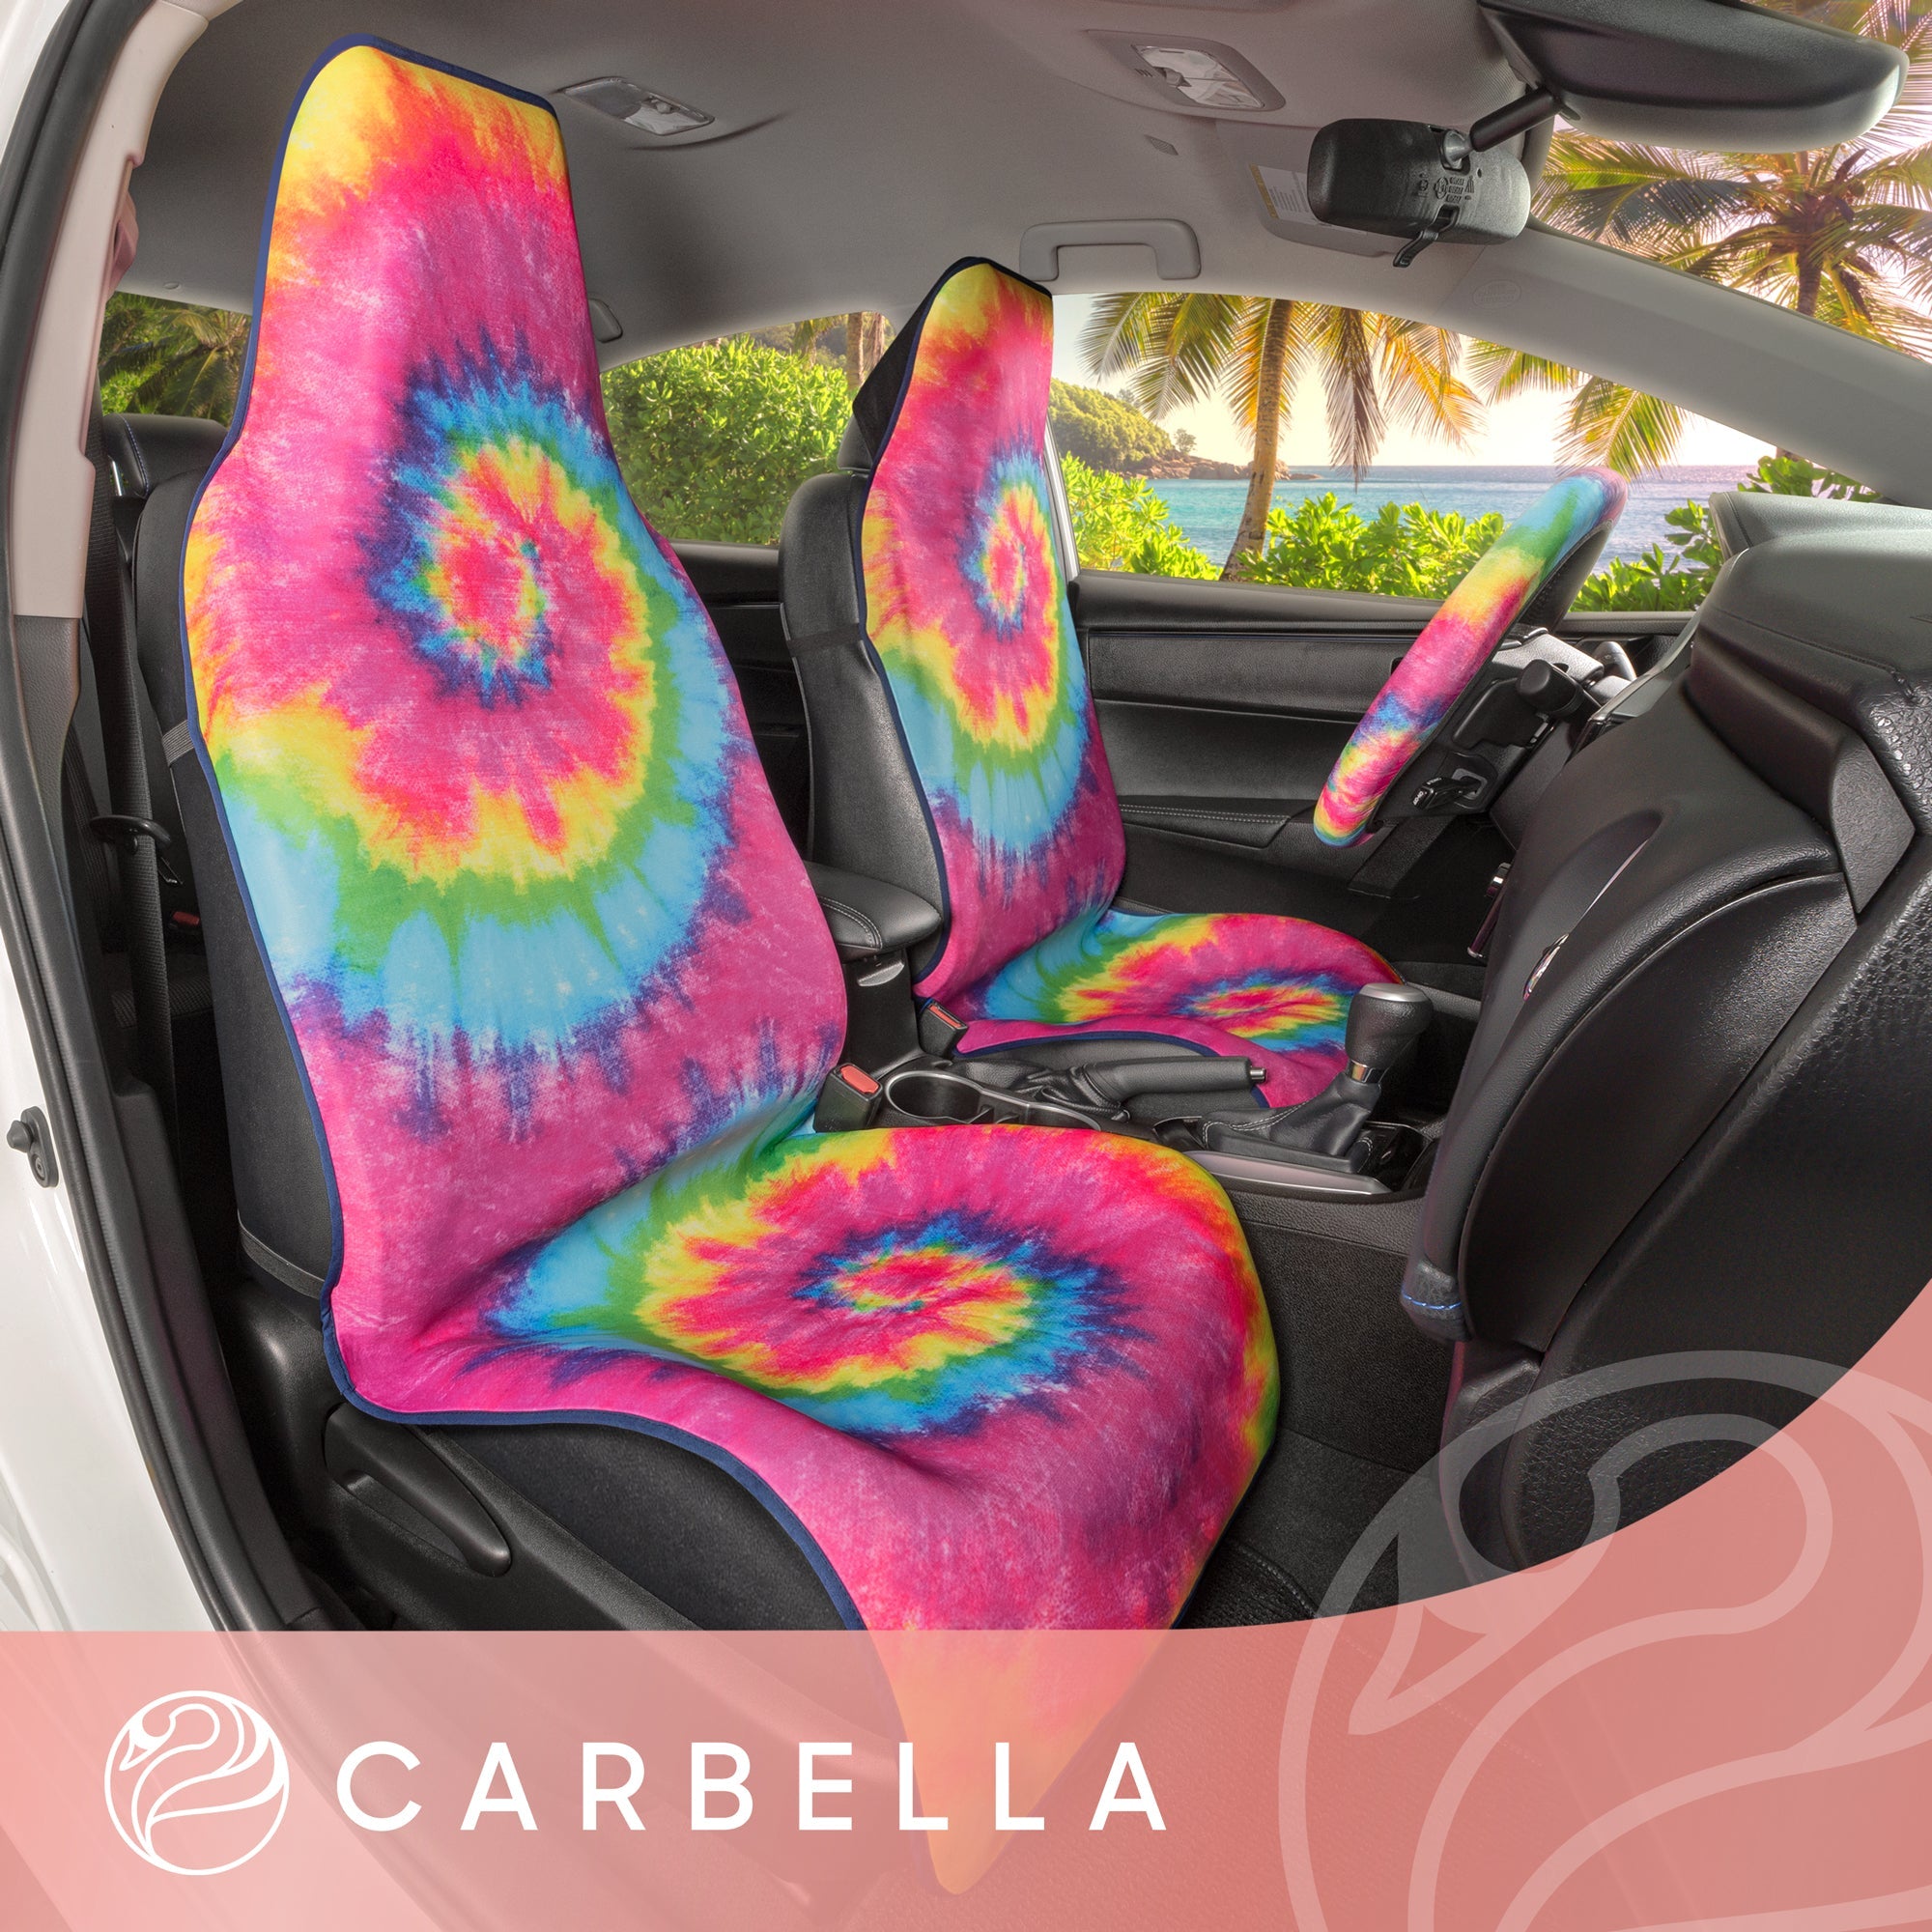 Carbella Rainbow Tie-Dye Car Seat Covers, 2 Pack Hippie Boho Front Seat Covers for Cars with Matching Steering Wheel Cover, Cute Automotive Interior Covers for Trucks Van SUV